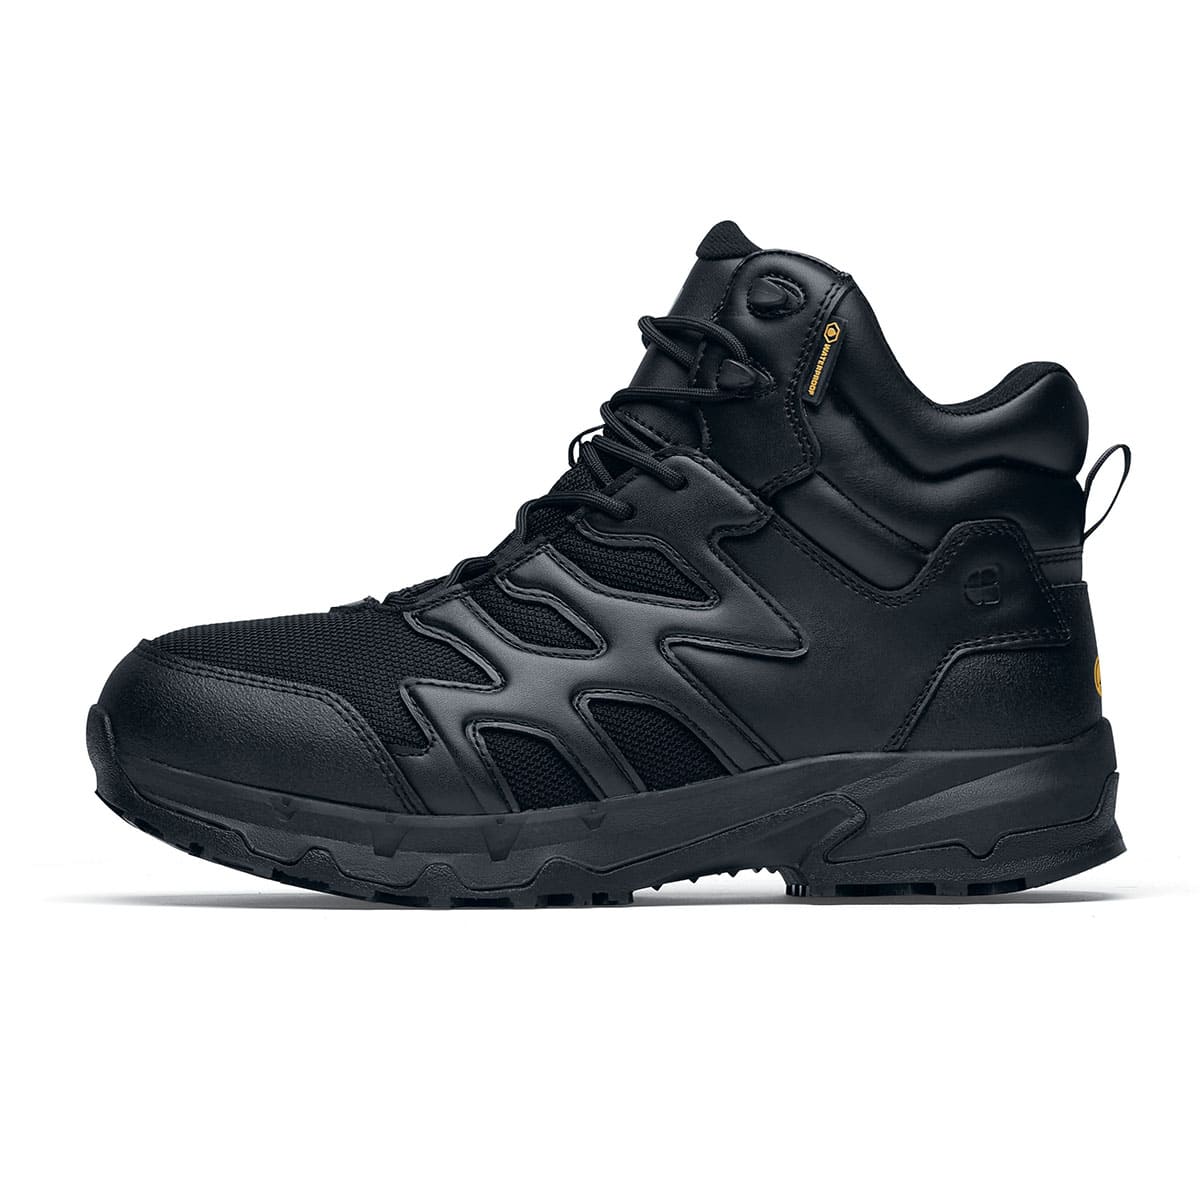 The Shoes for Crews Carrig Mid is a slip-resistant safety boot with a waterproof upper, seen from the left.